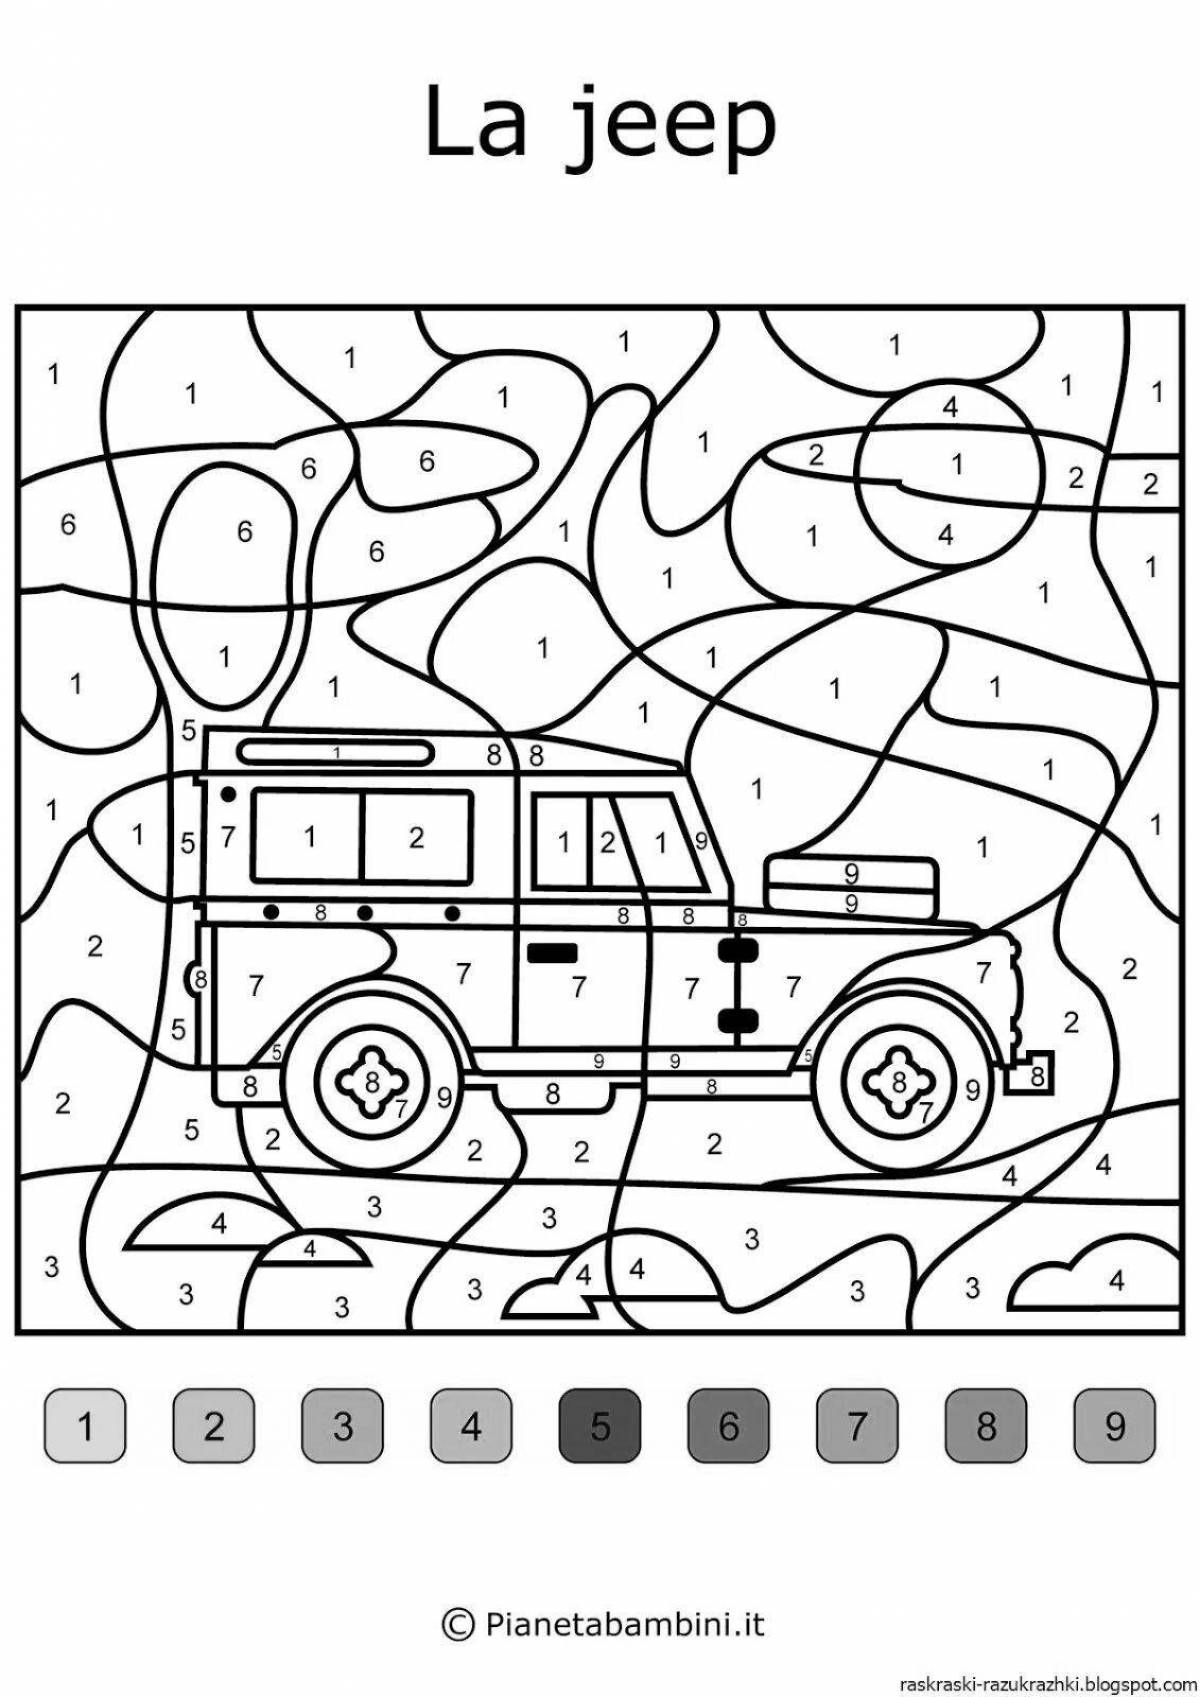 Fun coloring by numbers for 6 year olds